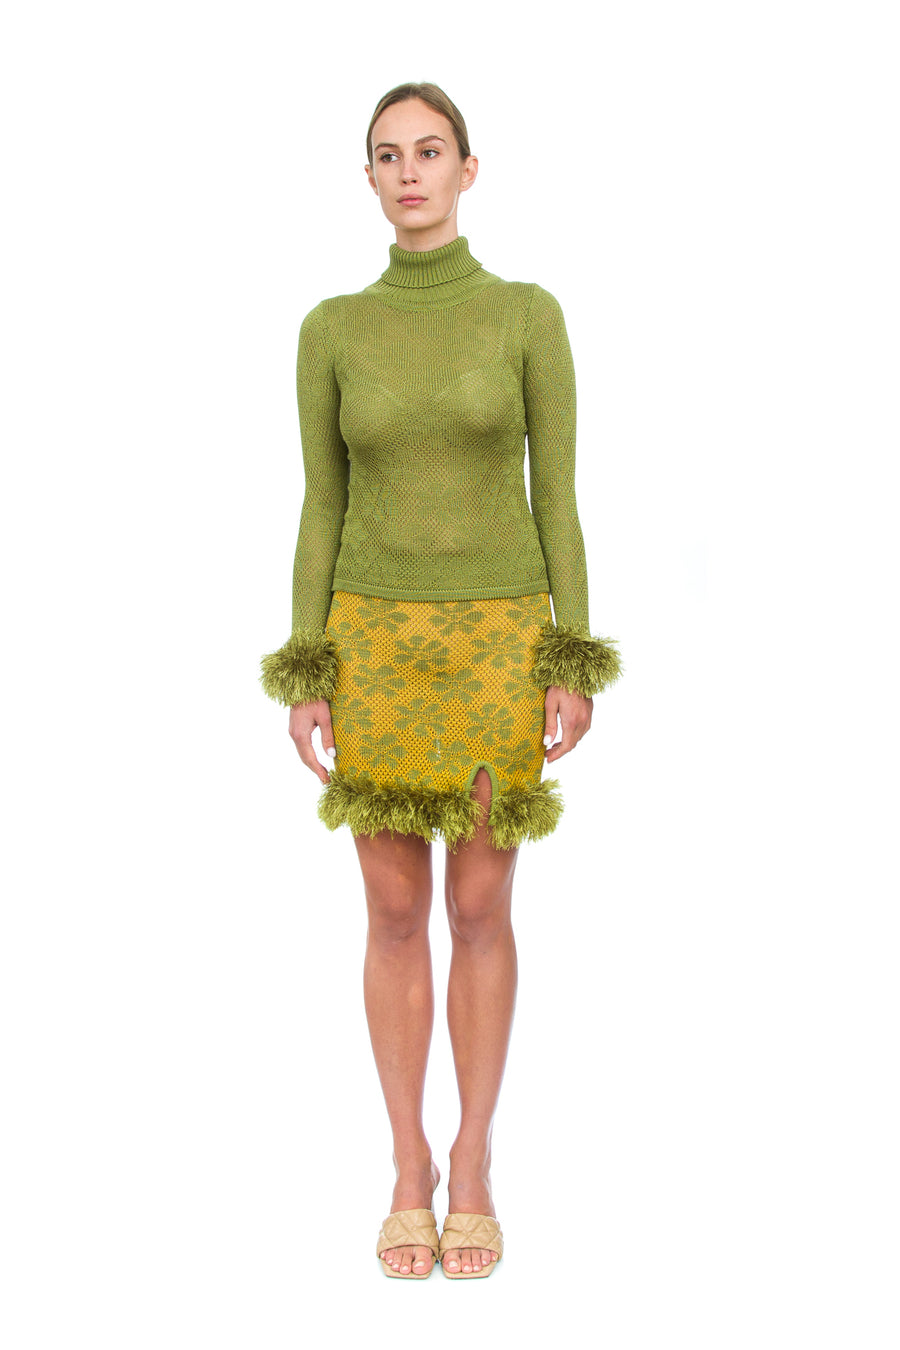 Green knit turtleneck with handmade knit details